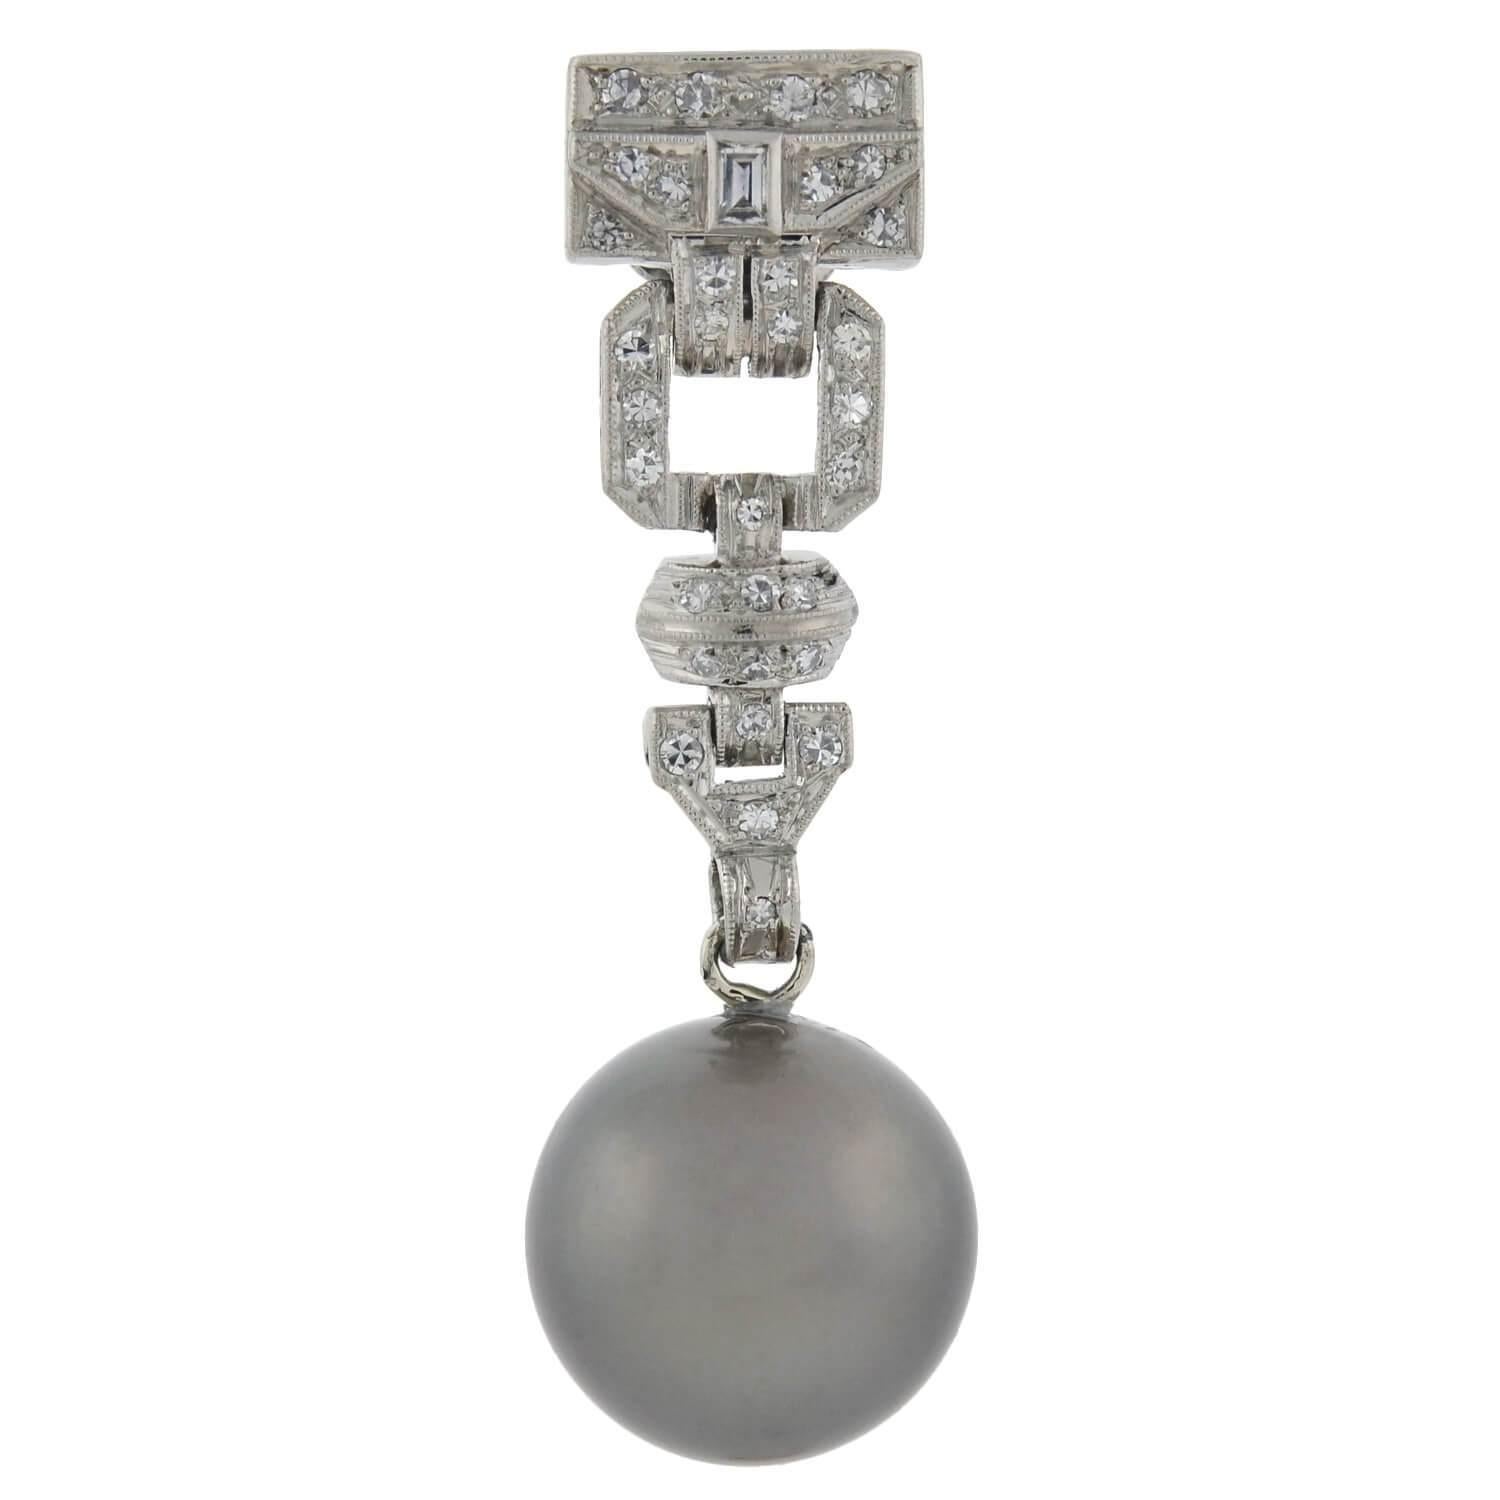 A stunning pair of diamond and black Tahitian pearl earrings from the Art Deco (ca1920) era! Crafted in platinum, each earring adorns a single Tahitian South Sea pearl dangling at the base of an elegant drop design. The 13.5mm pearl exhibits a high